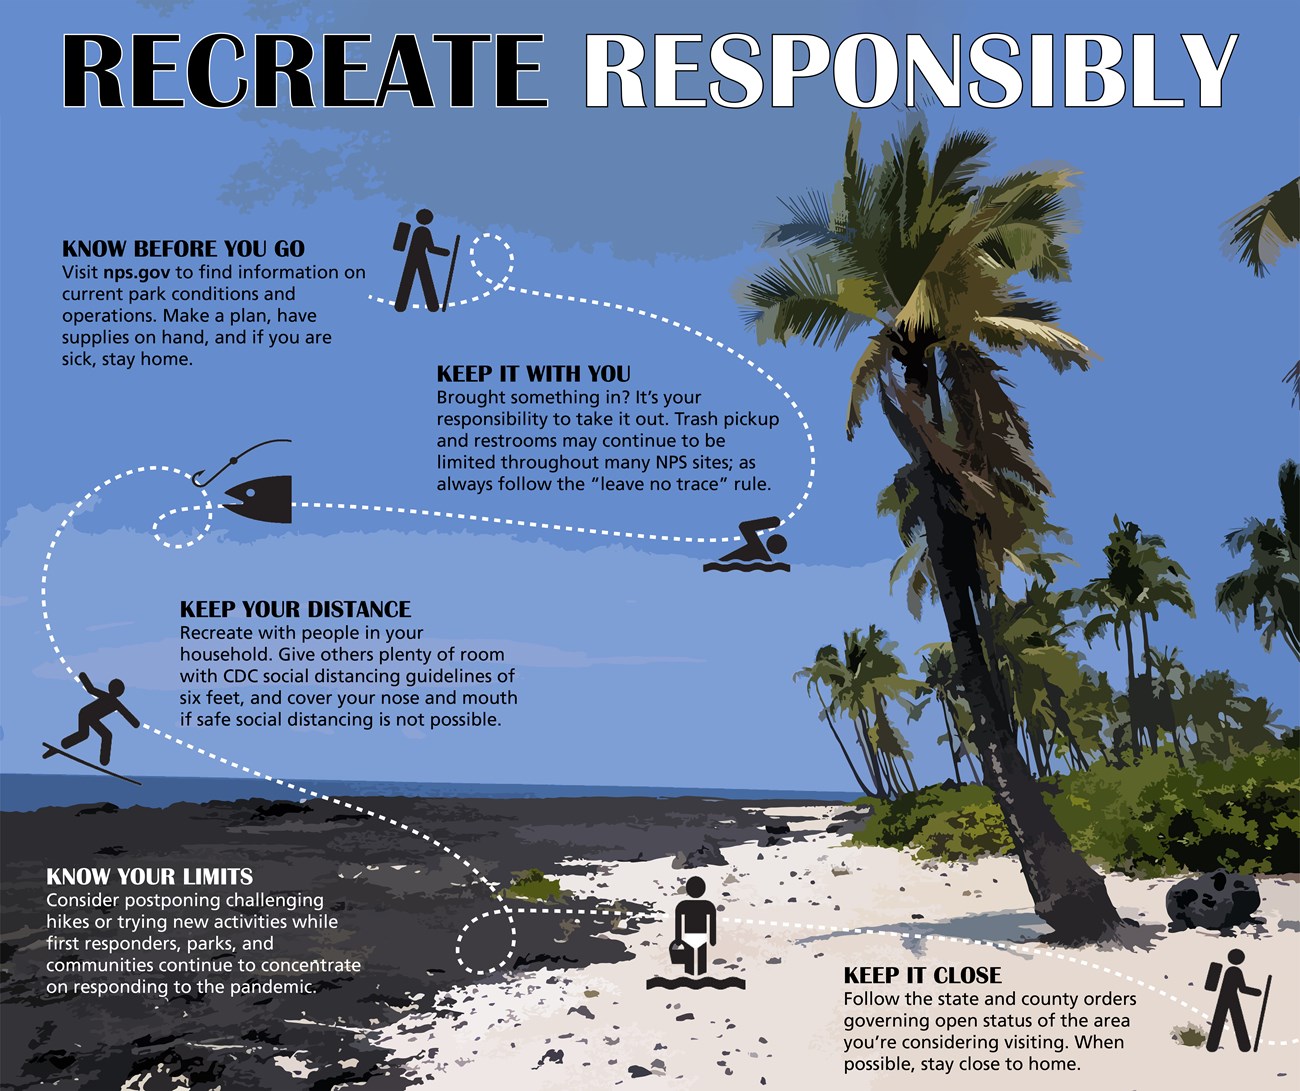 Recreate Responsibly Infographic - see drop down menu below image for full alt text description